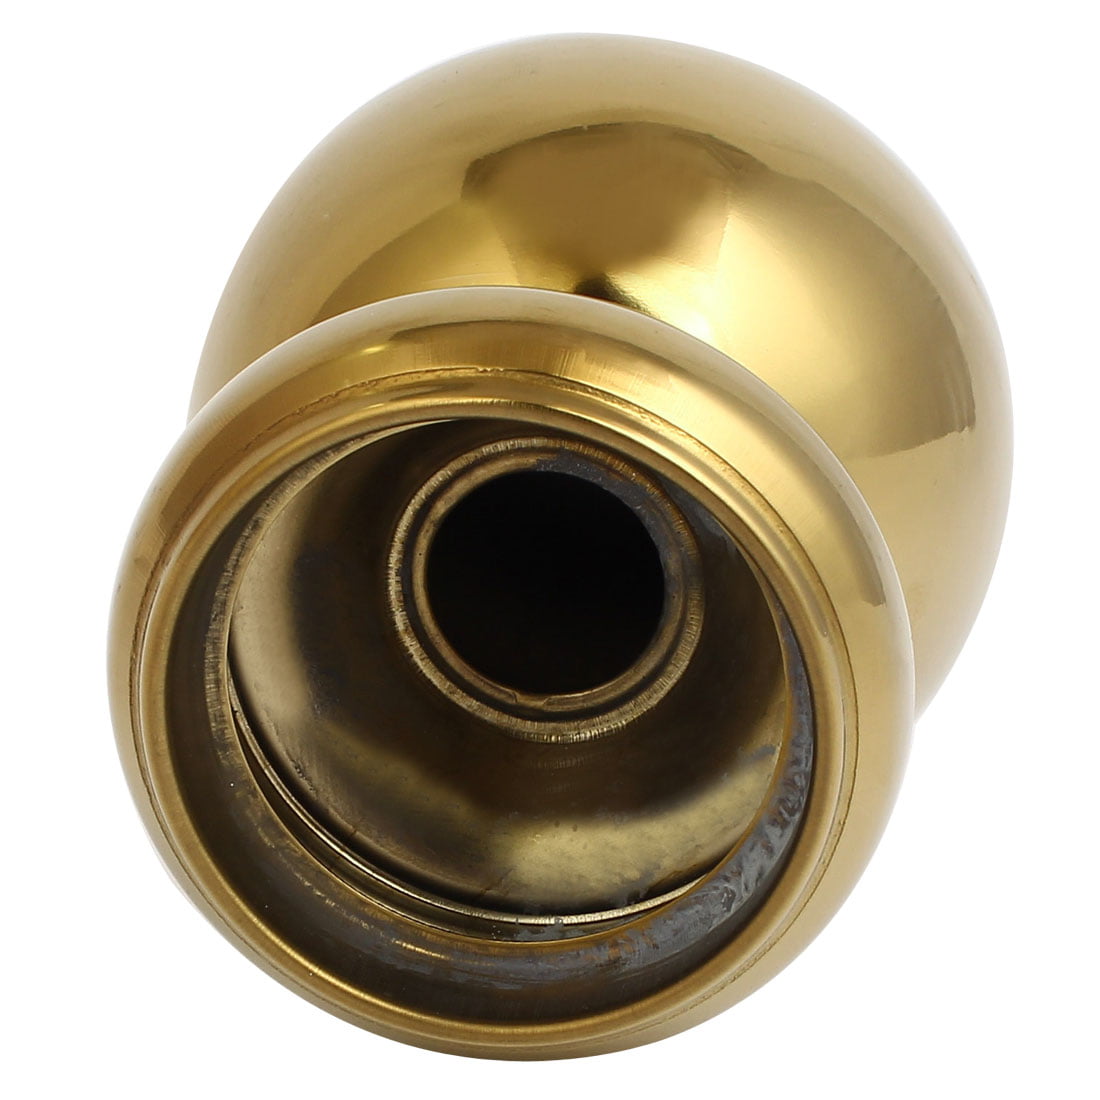 sourcingmap® 63mm Ball Top Cap 201 Stainless Steel Gold Tone for Stair Newel Fence Post